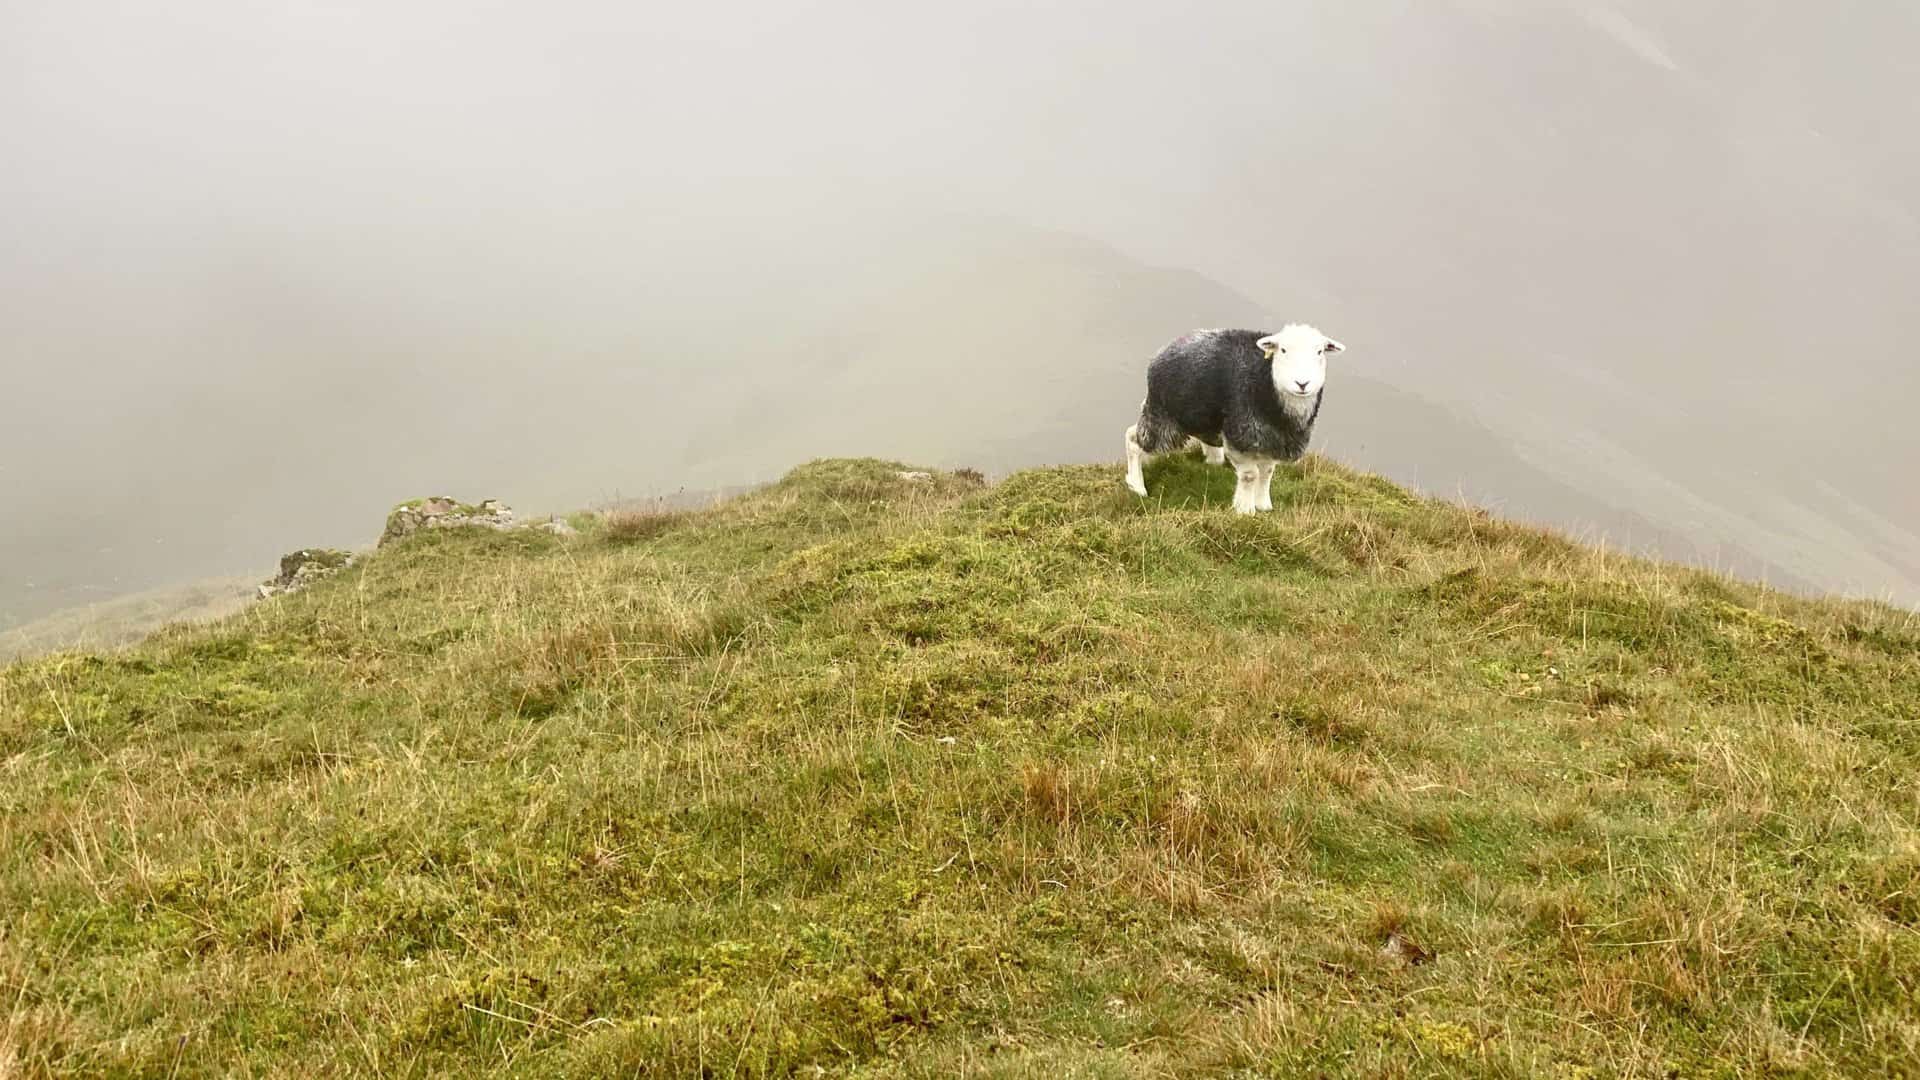 The Herdwick breed of sheep is one of the toughest in the UK and is perfectly adapted to a harsh life on the high fells of the Lake District.